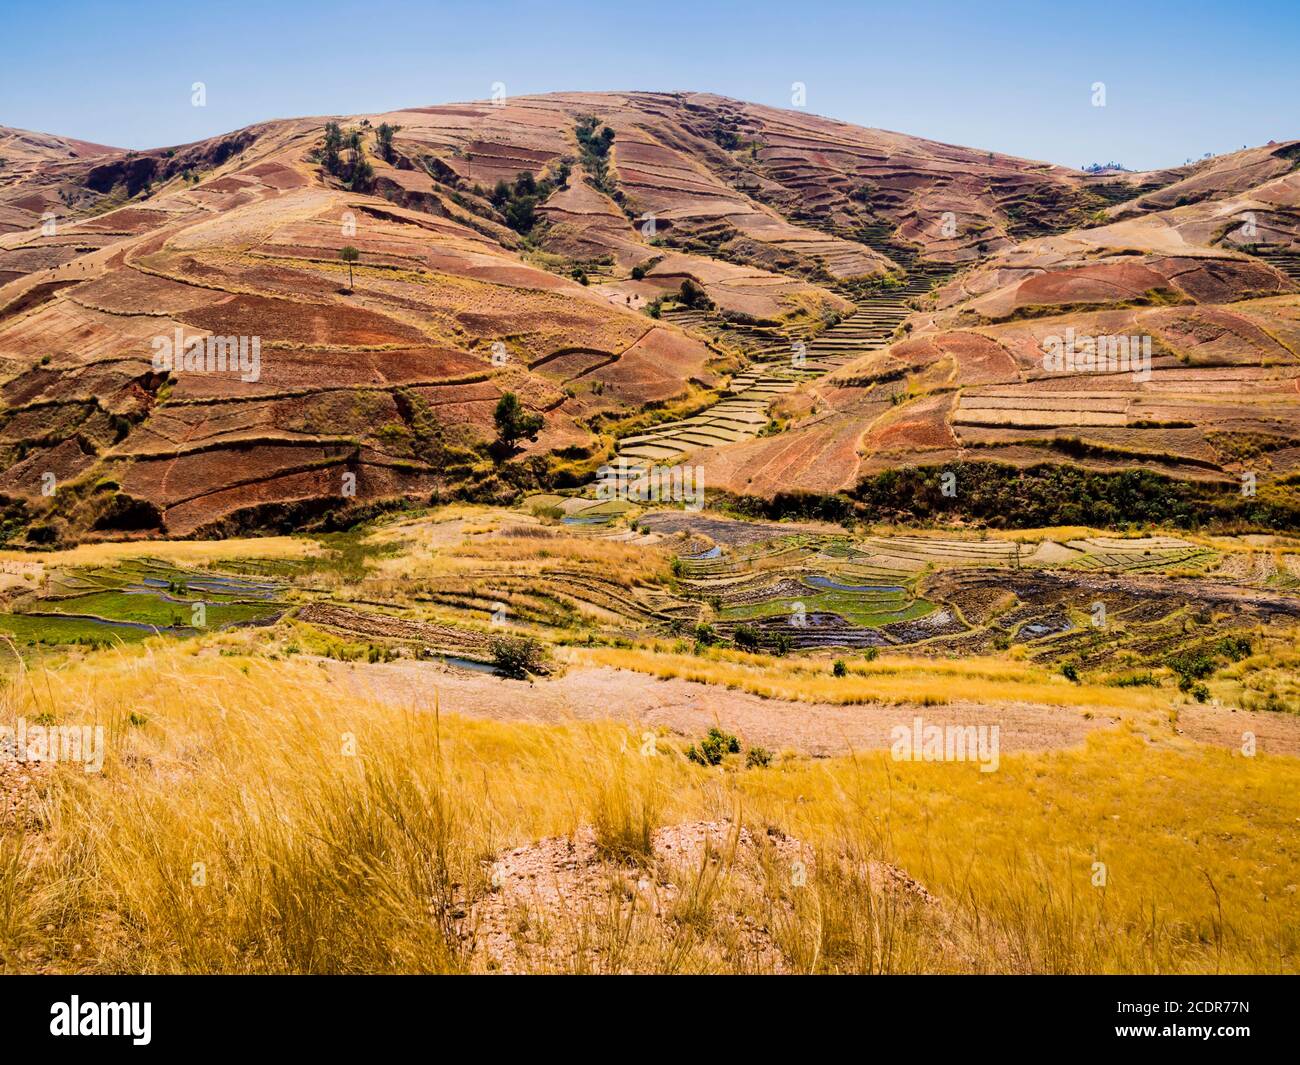 Colorful hills with terraced rice paddy fields in the highlands of Madagascar Stock Photo